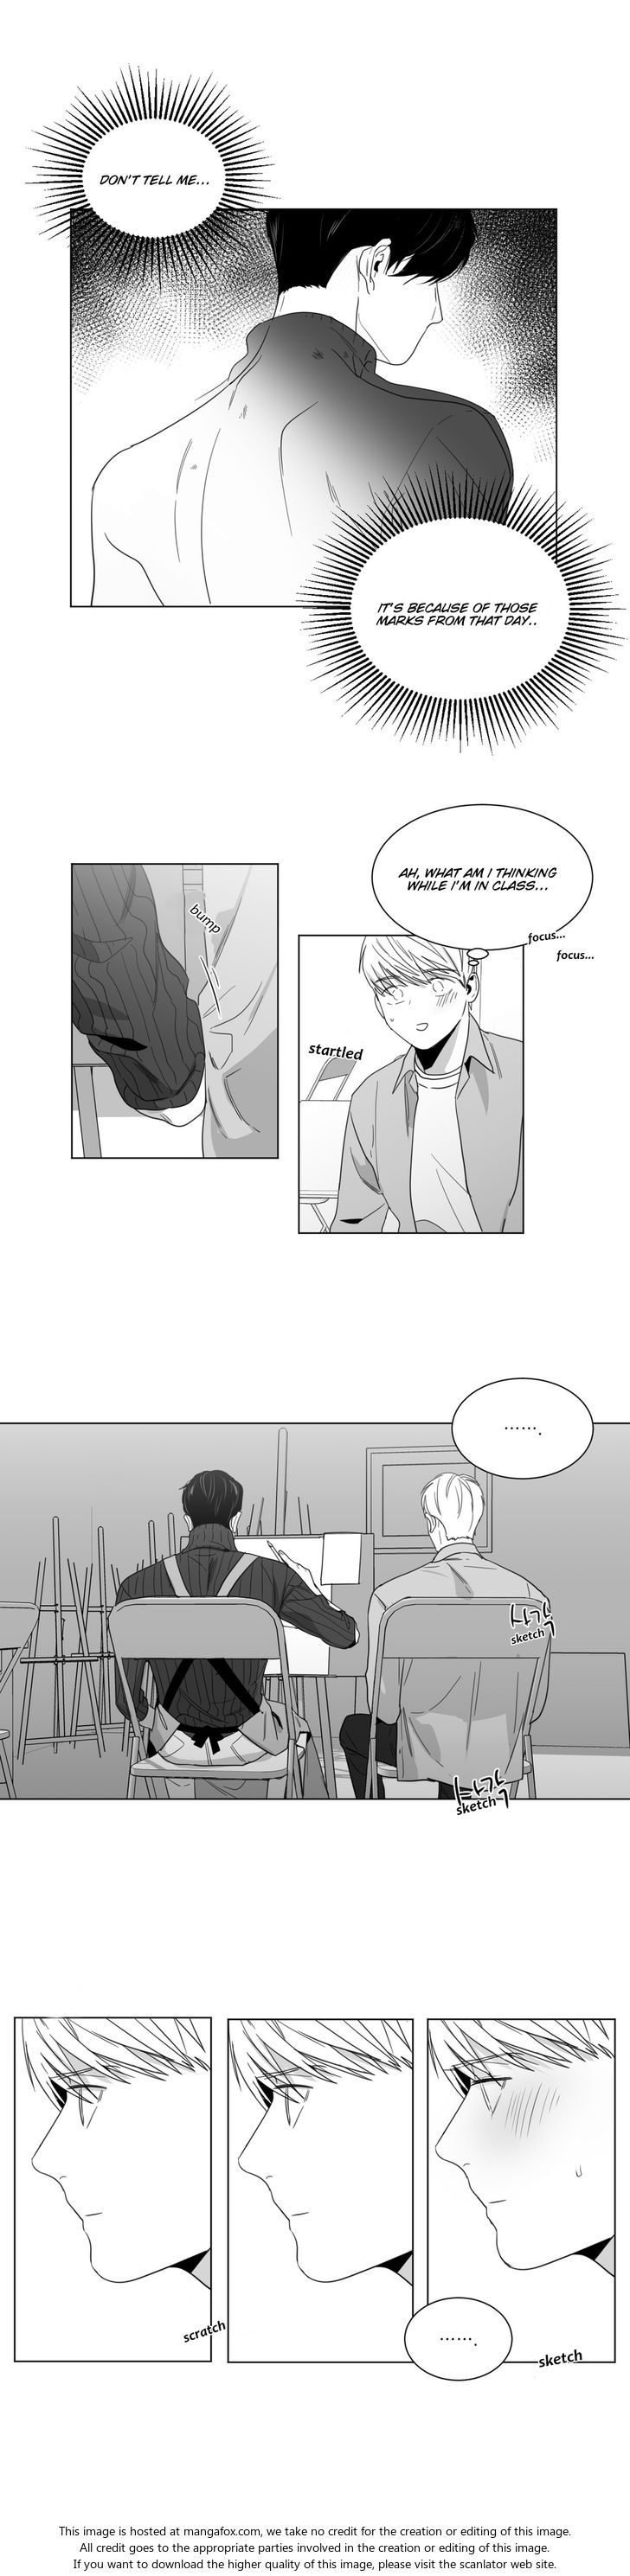 Lover Boy (Lezhin) Chapter 018 page 10